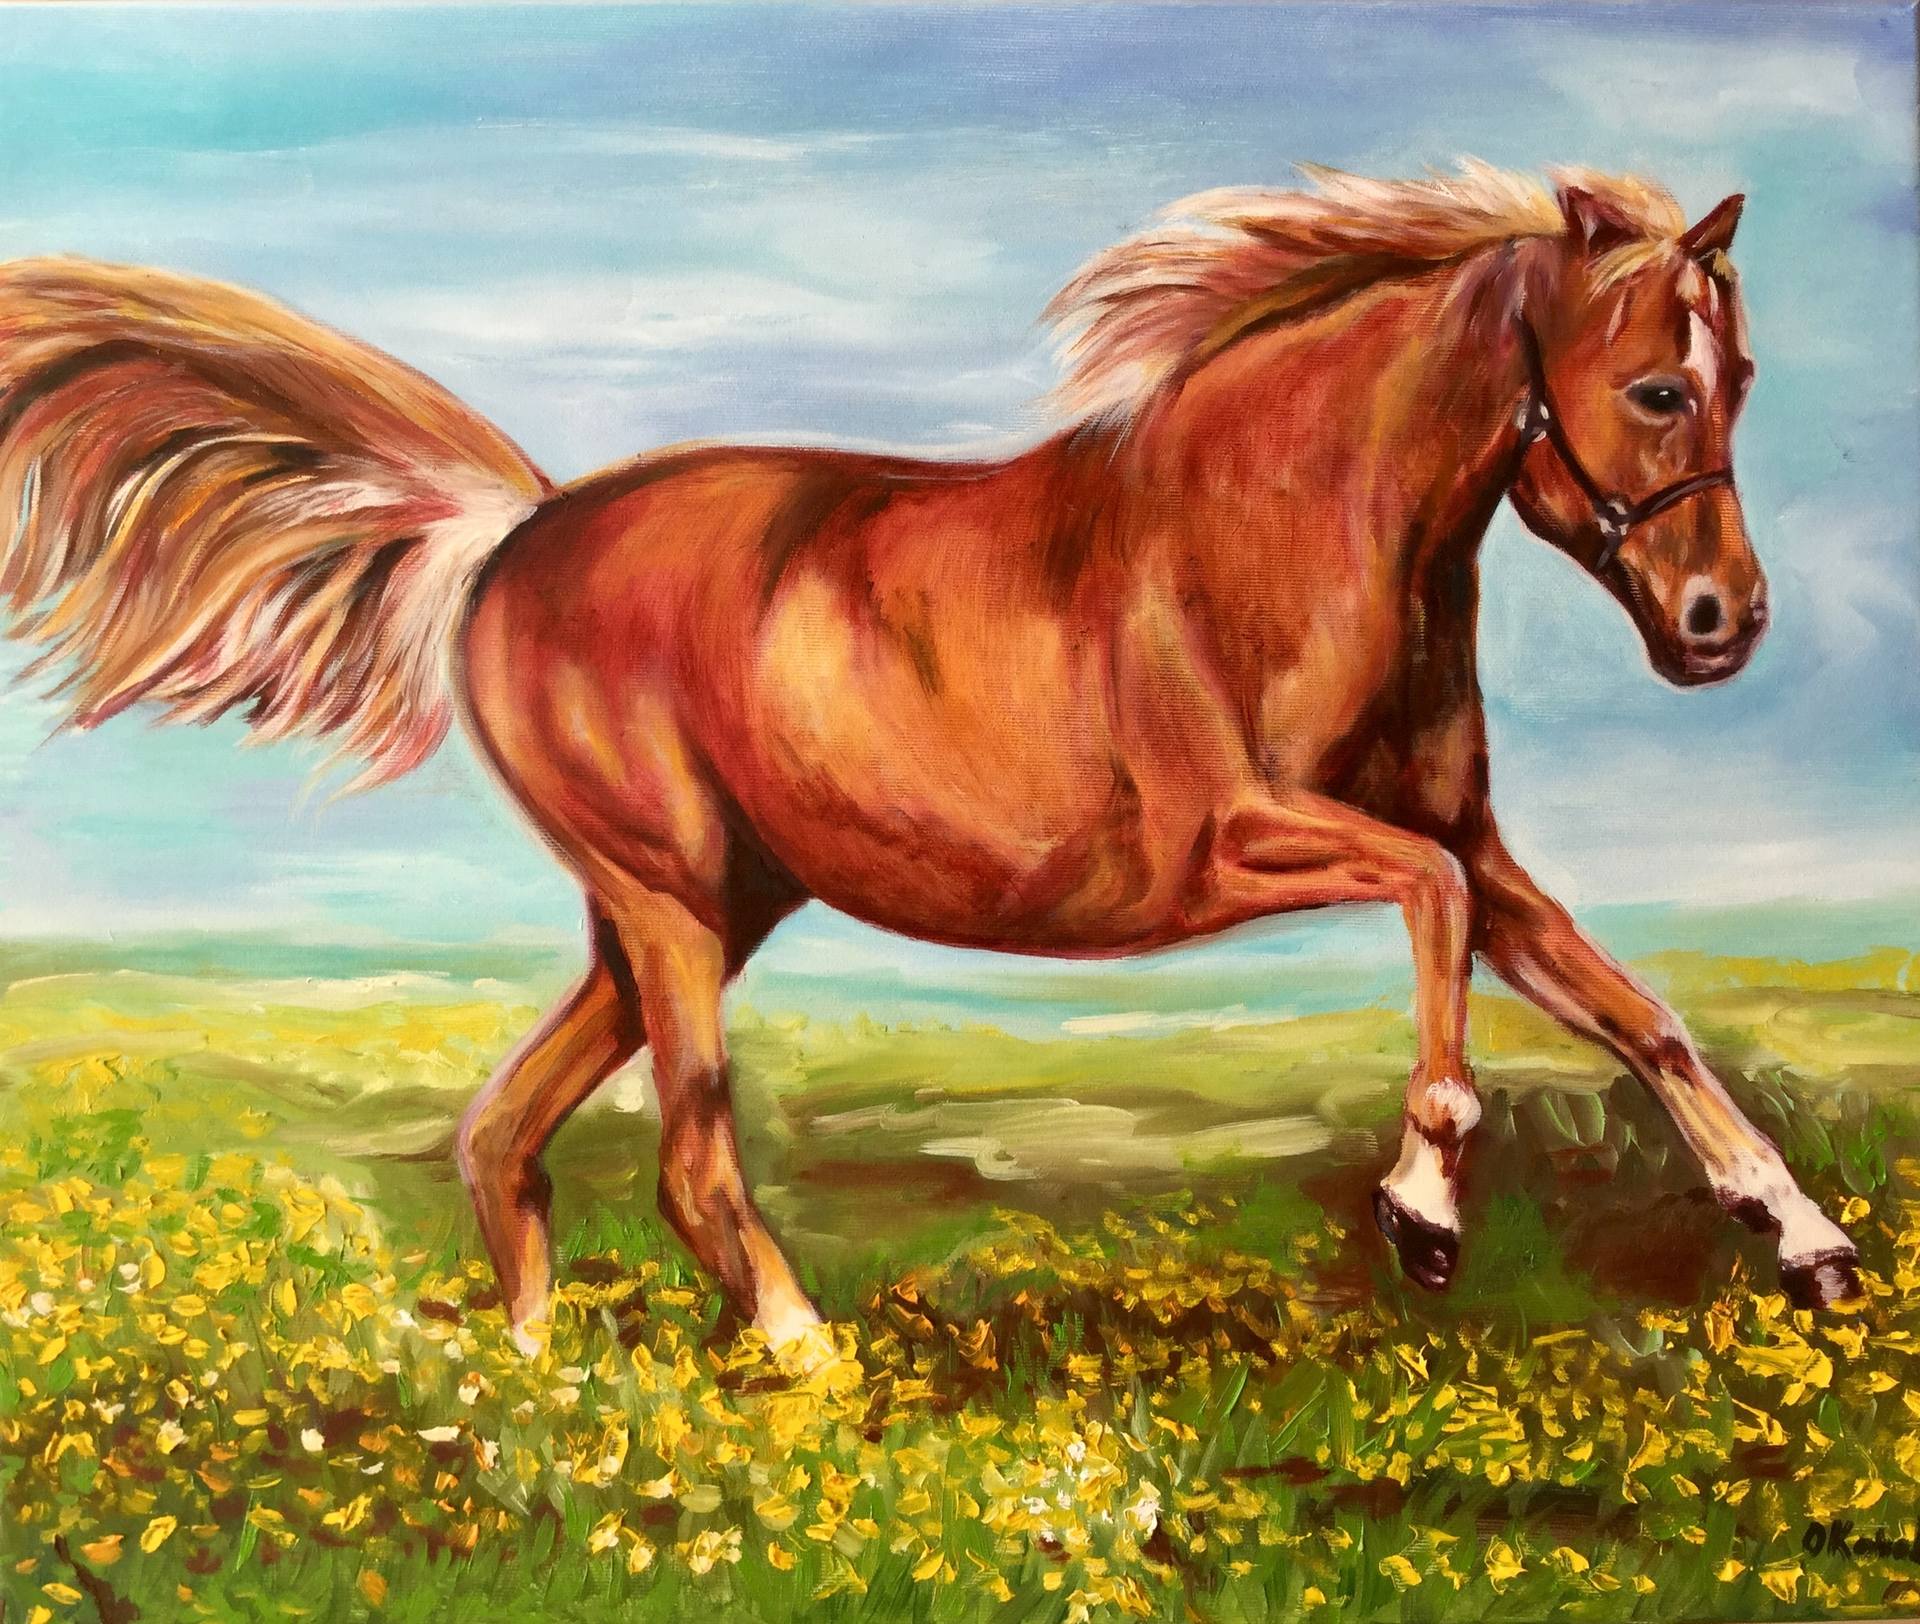 Saatchi Art: Horse on the field Painting by Olga Koval